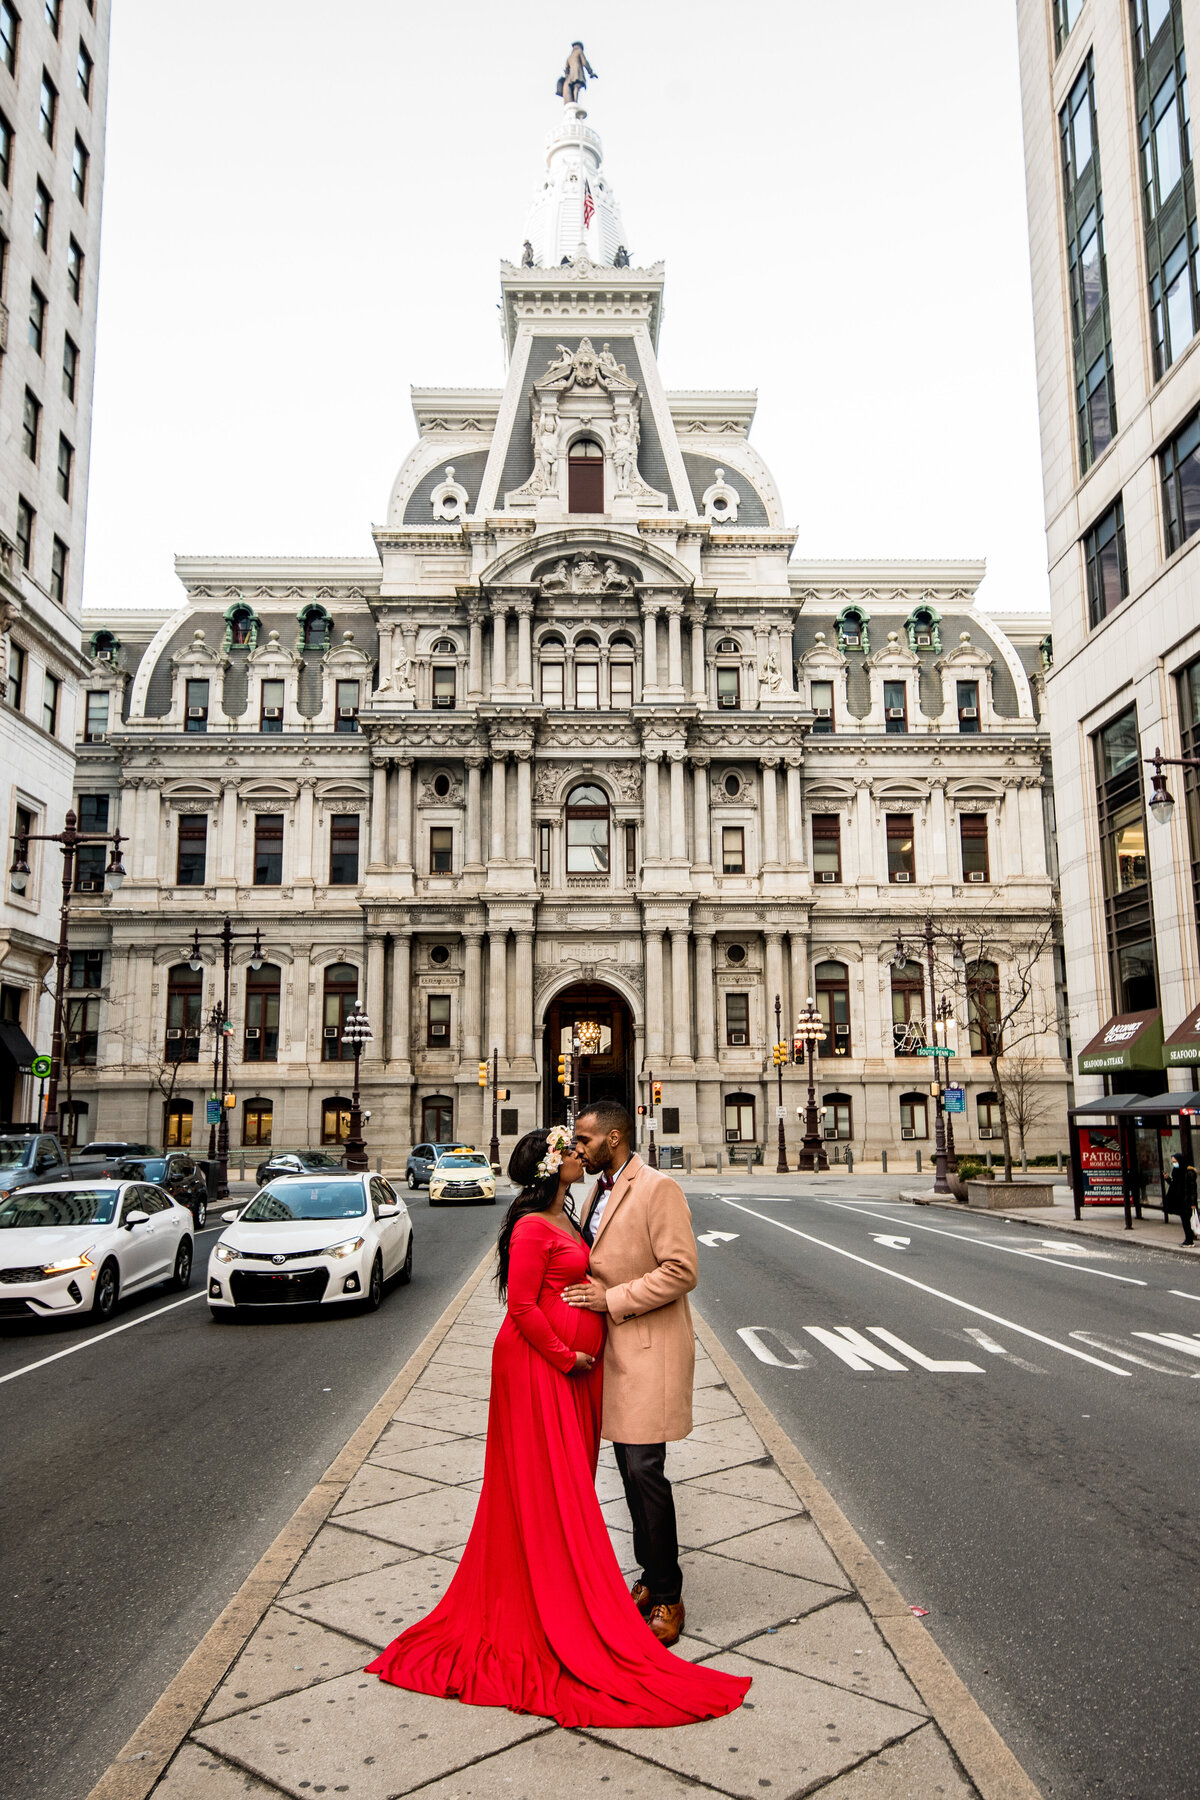 A couple stands in front of an old, ornate building for their maternity photos